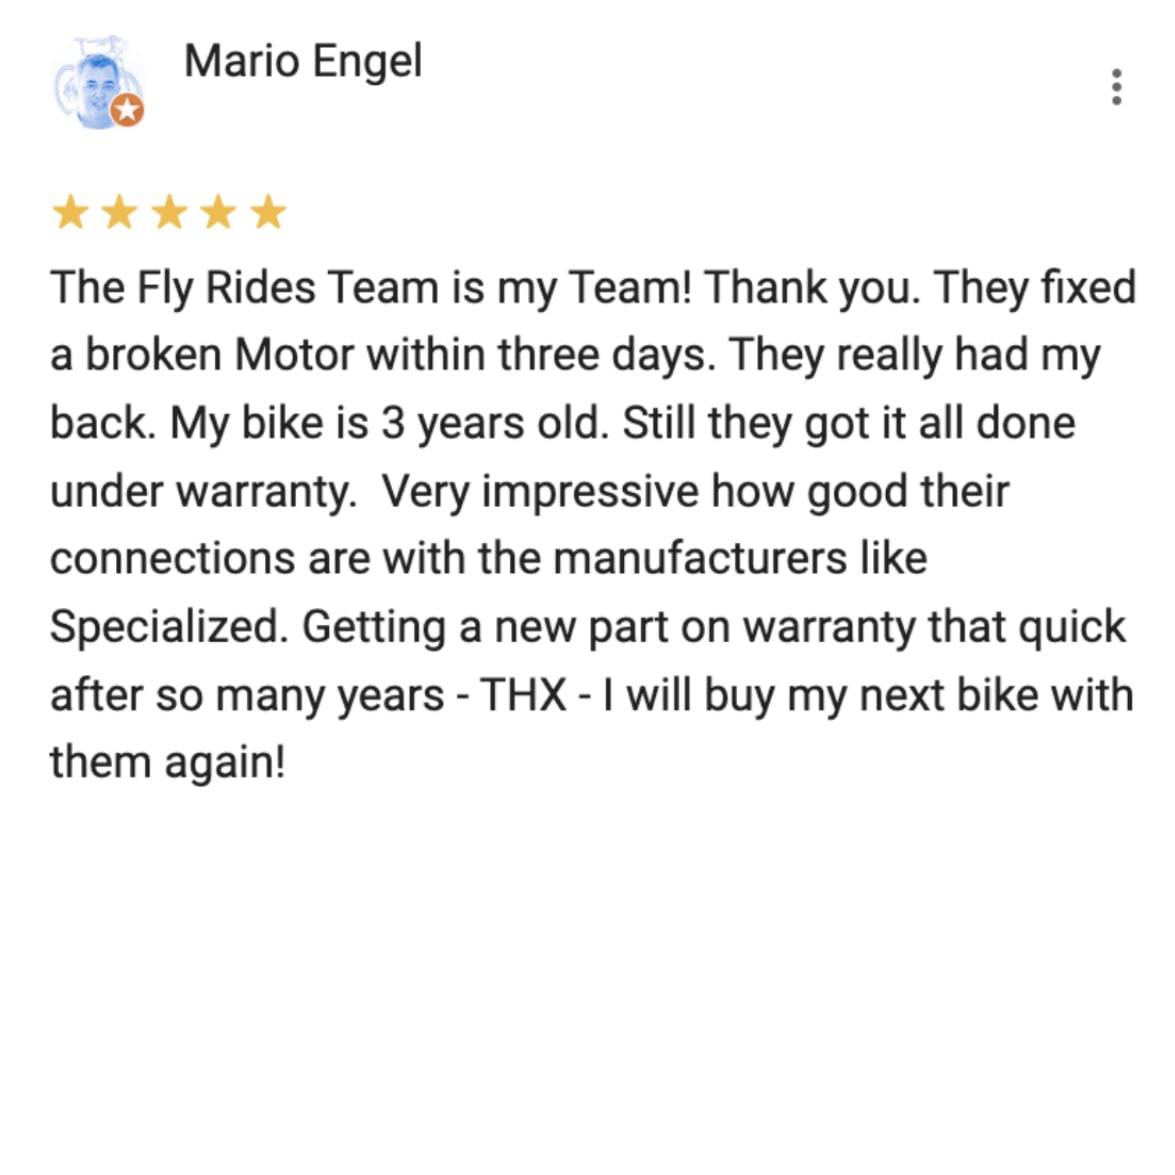 Customer Review by Mario talking about his positive experience with the eBike Service Team at LA Fly Rides